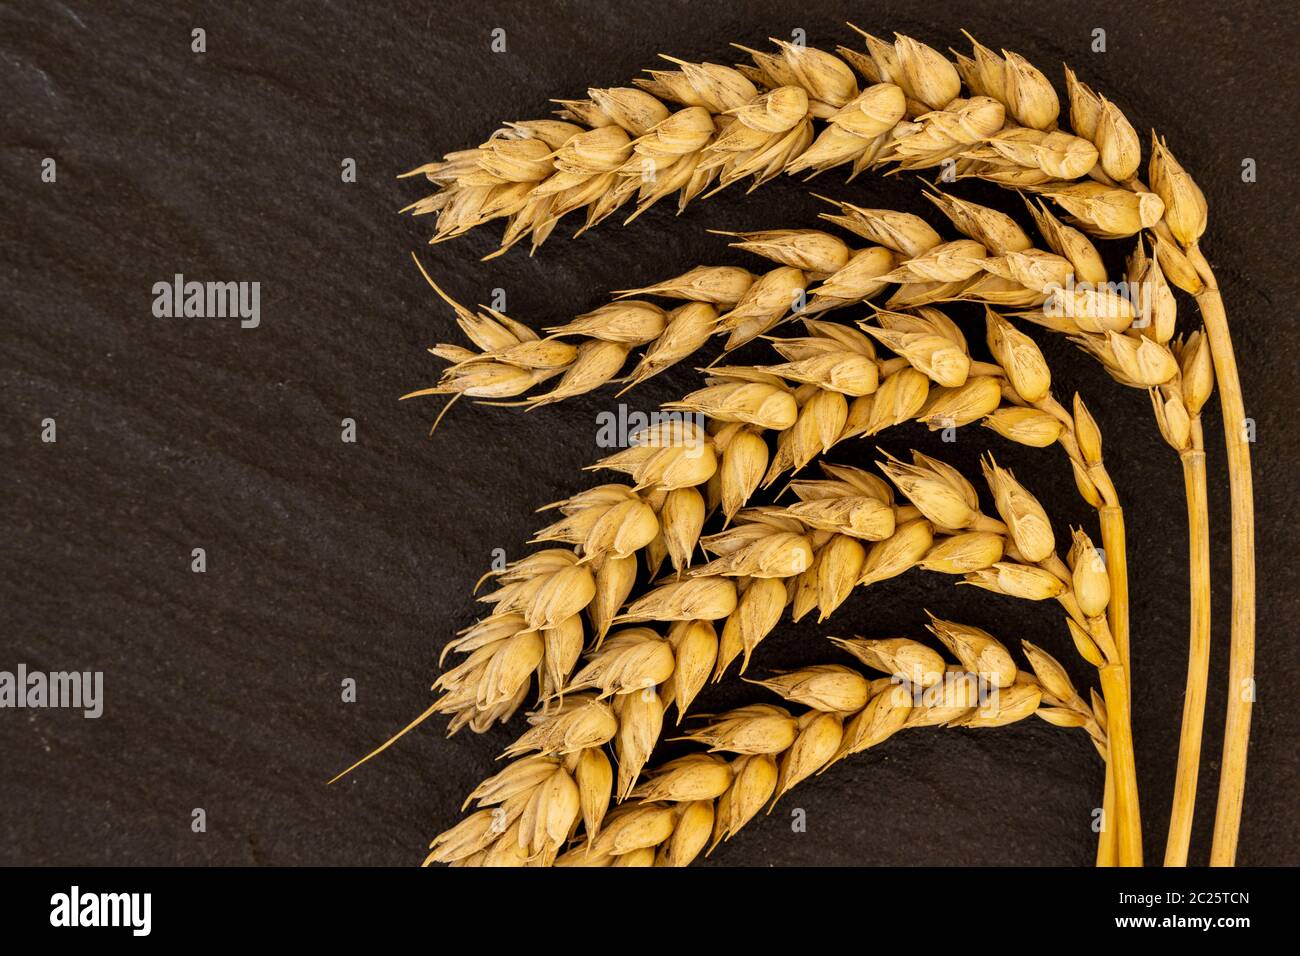 Cereal and Wheat at Harvest Stock Photo